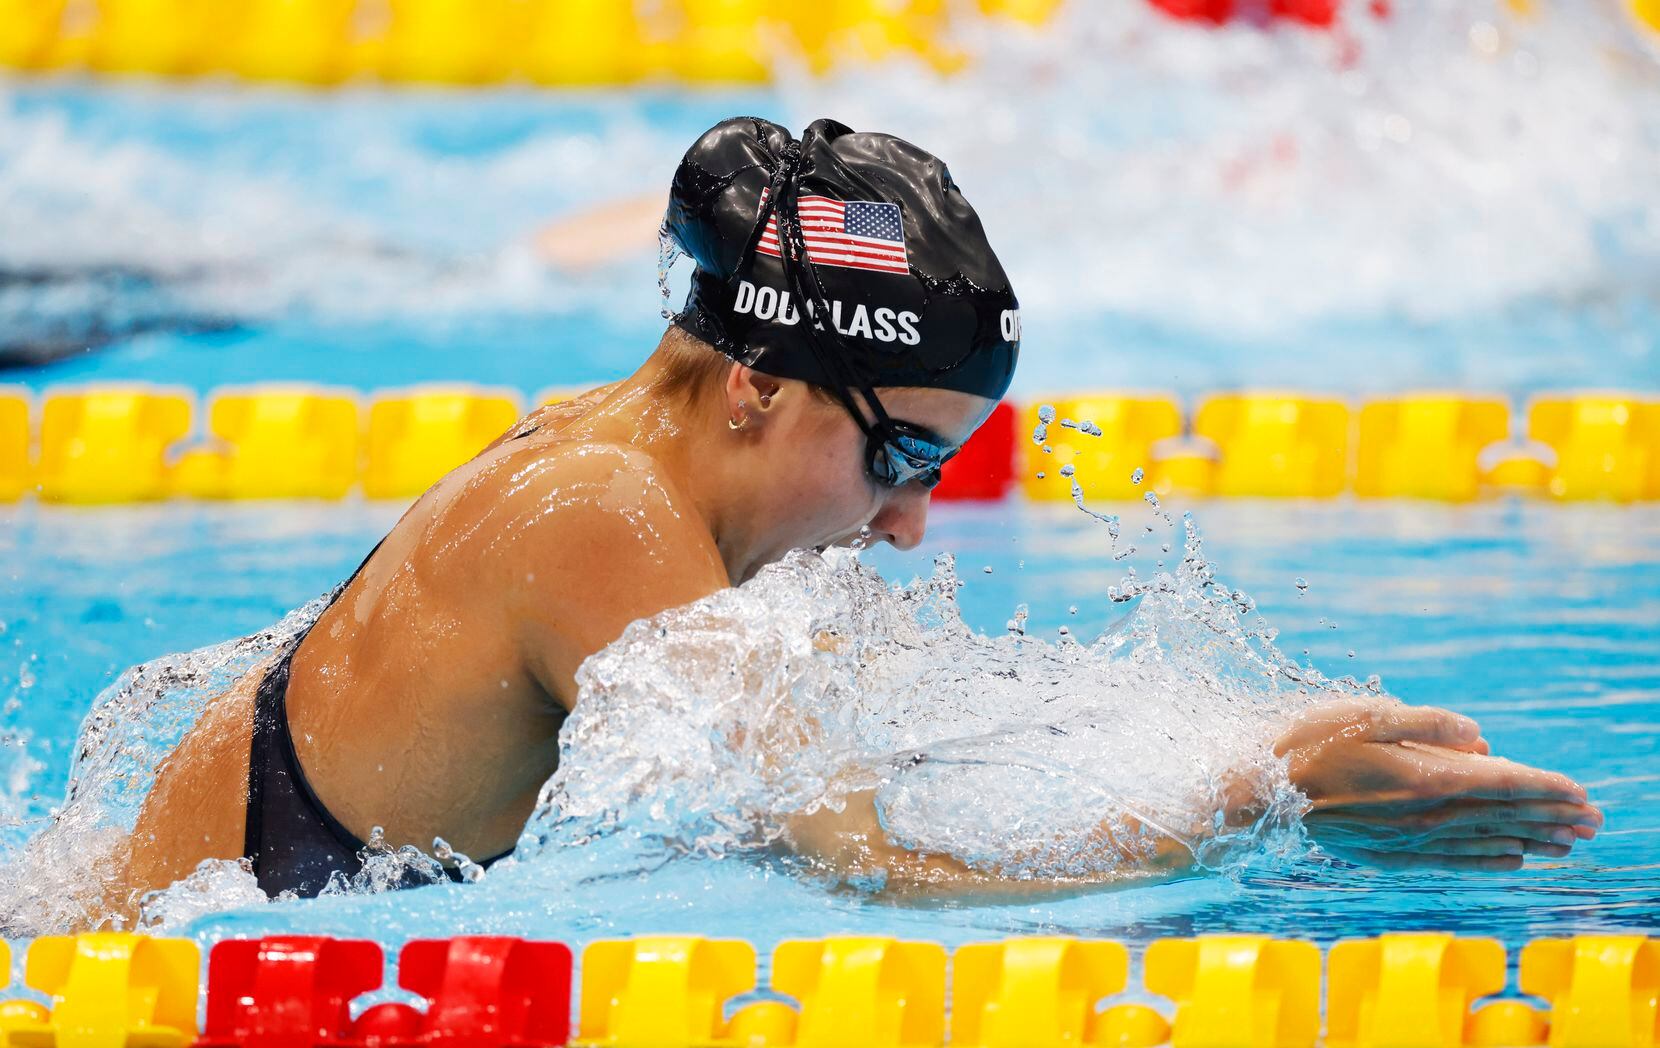 Team USA swimmer Kate Douglass sped through her lane in the women’s 200 meter individual...